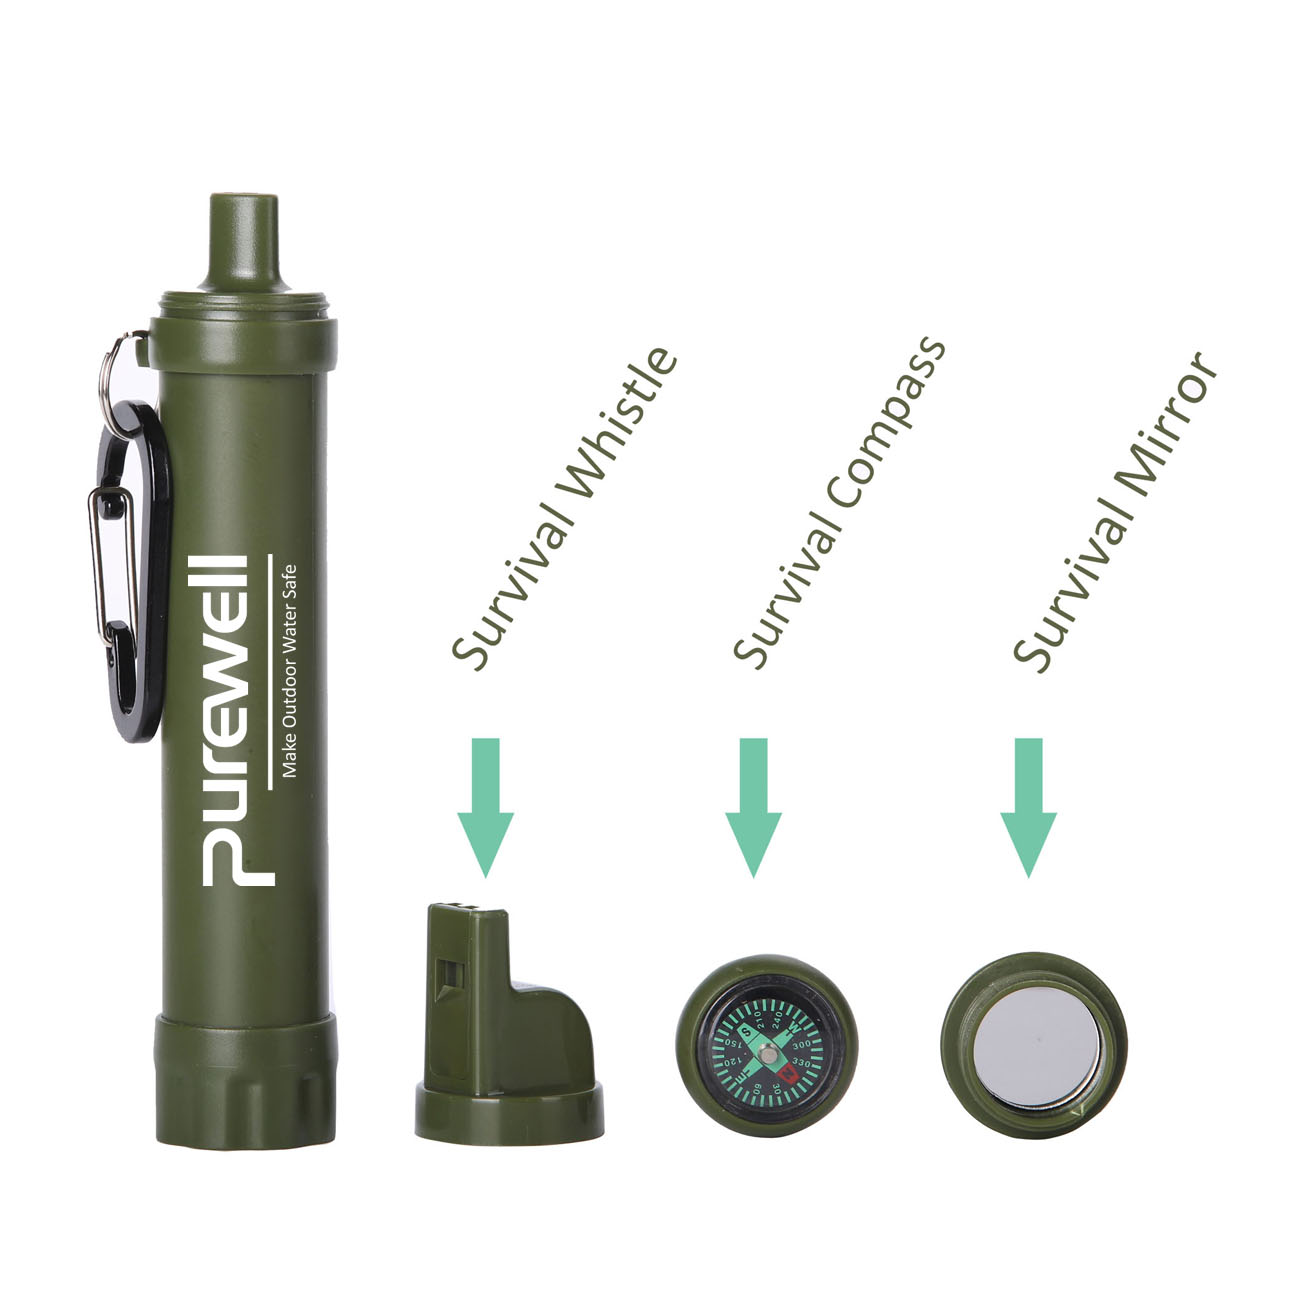 Purewell water purifier straw order now for traveling-1